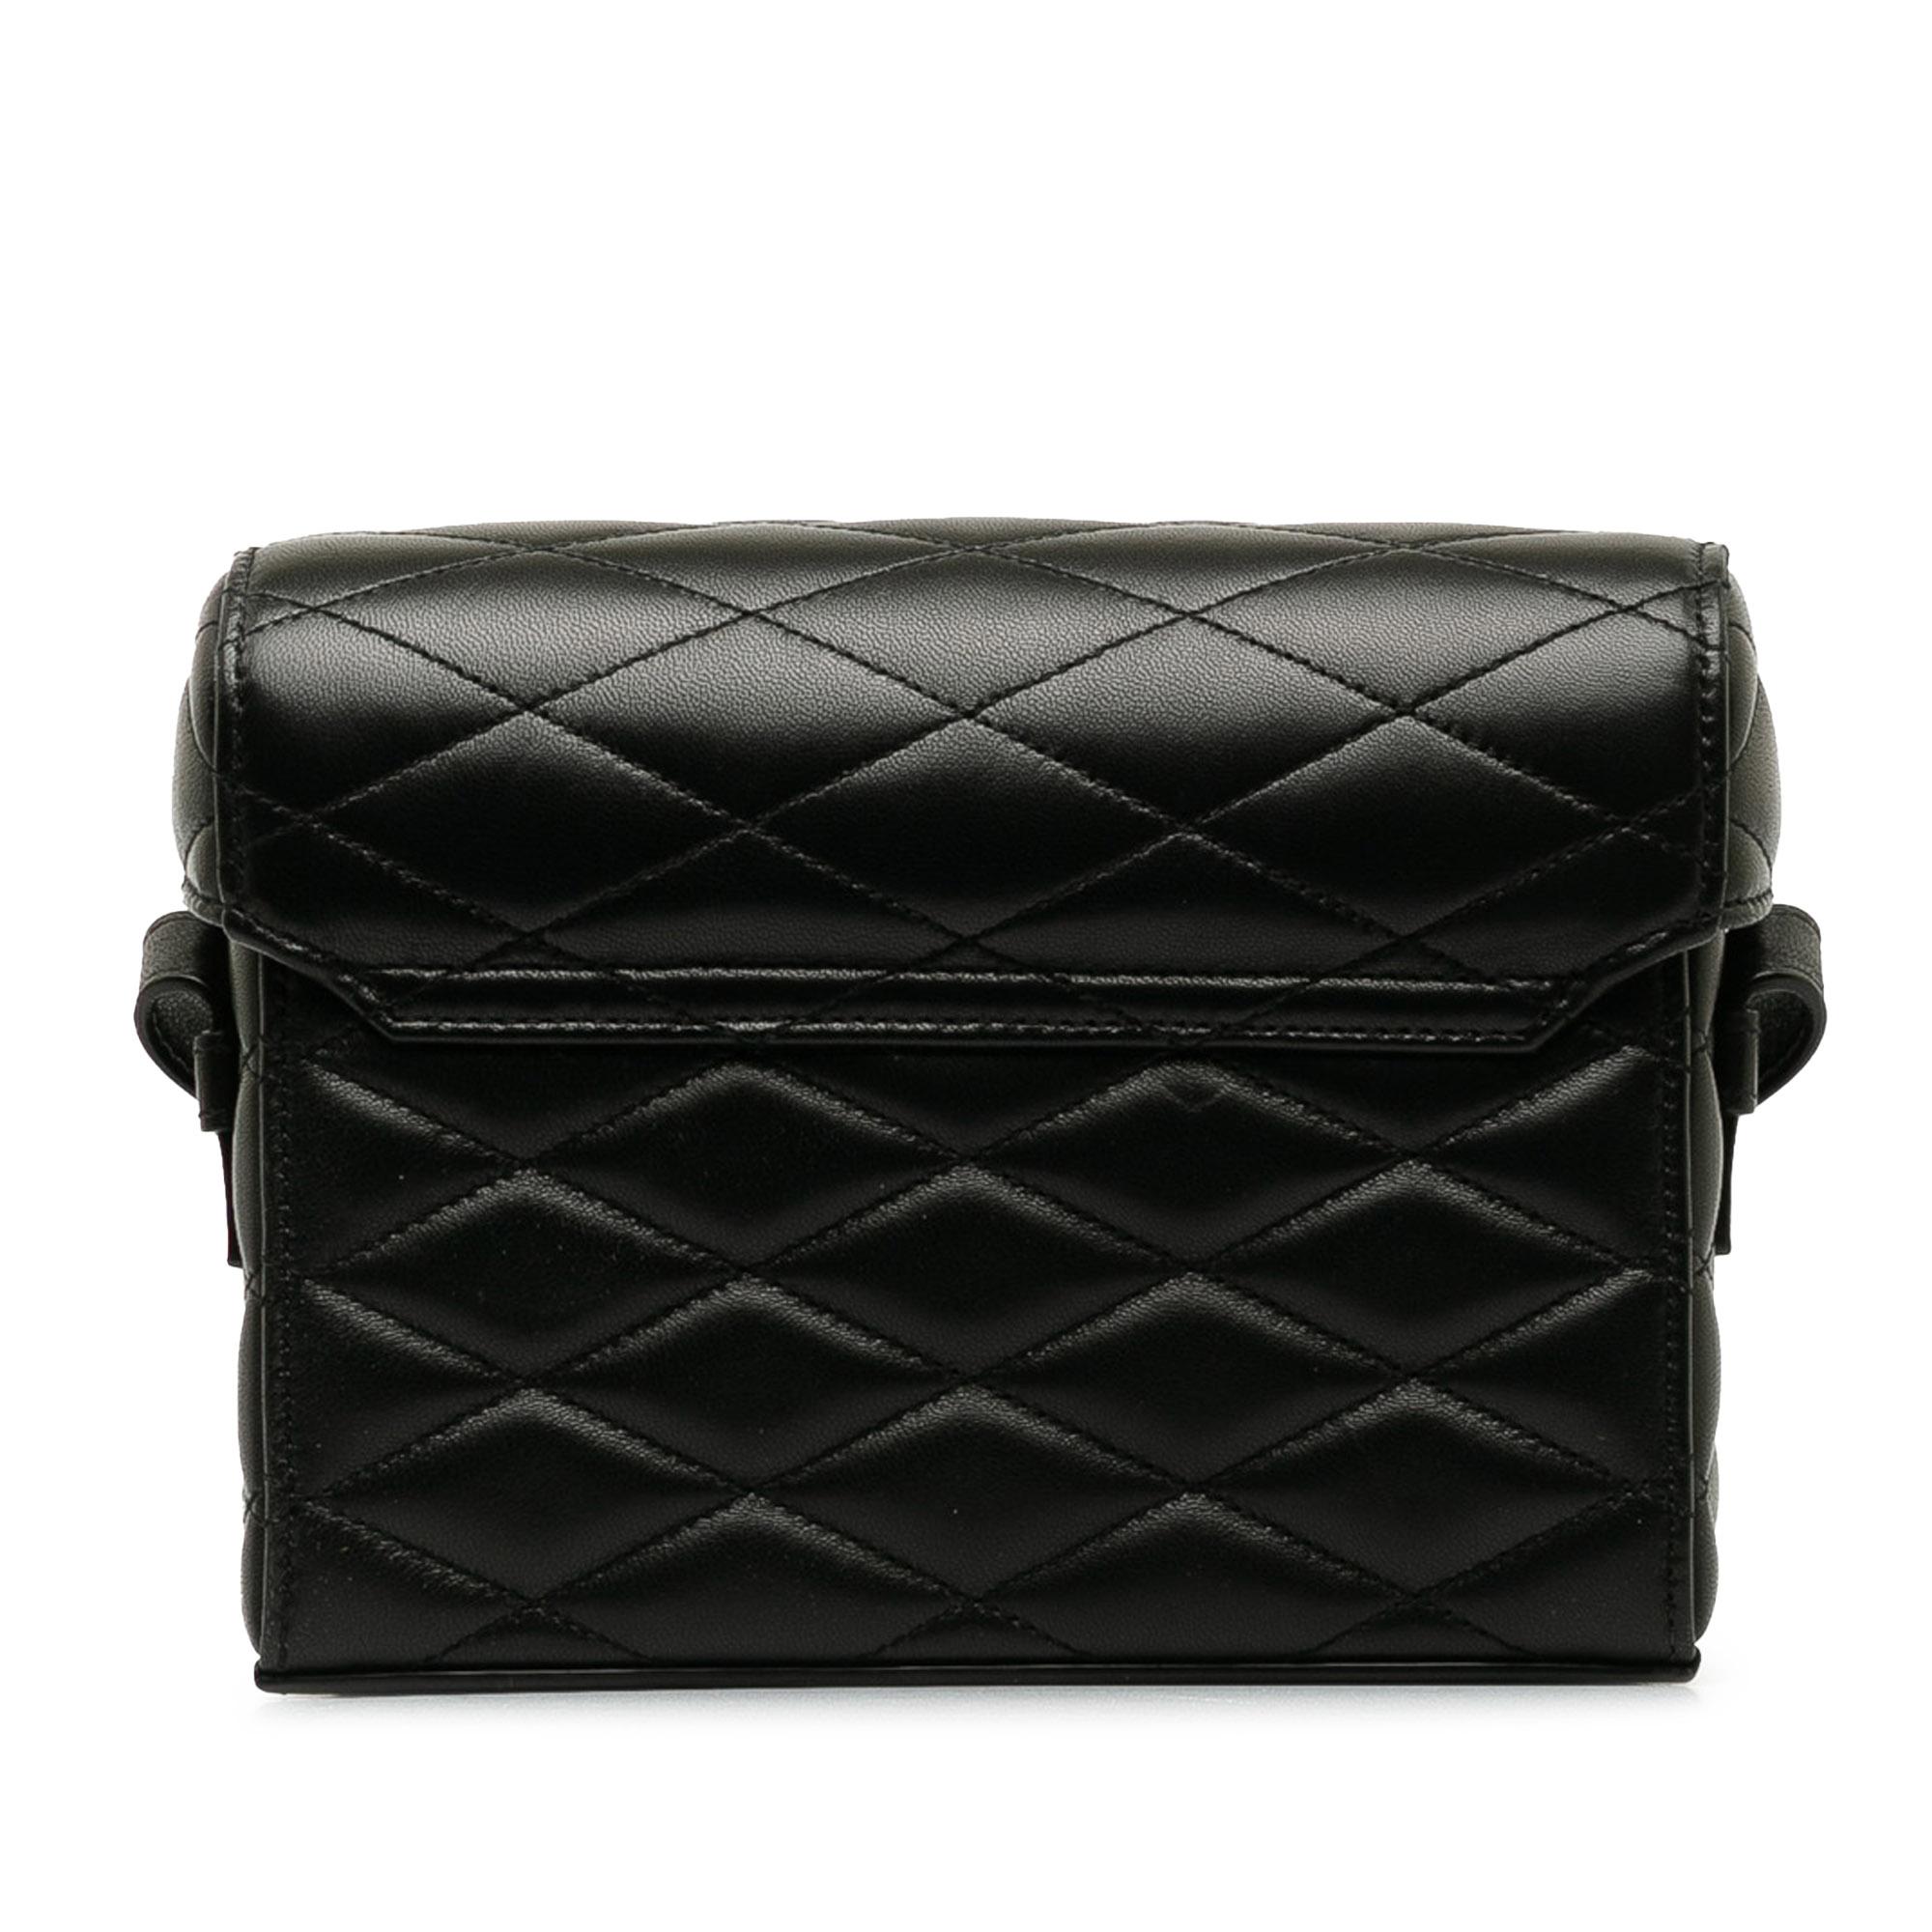 lambskin-quilted-june-box-bag